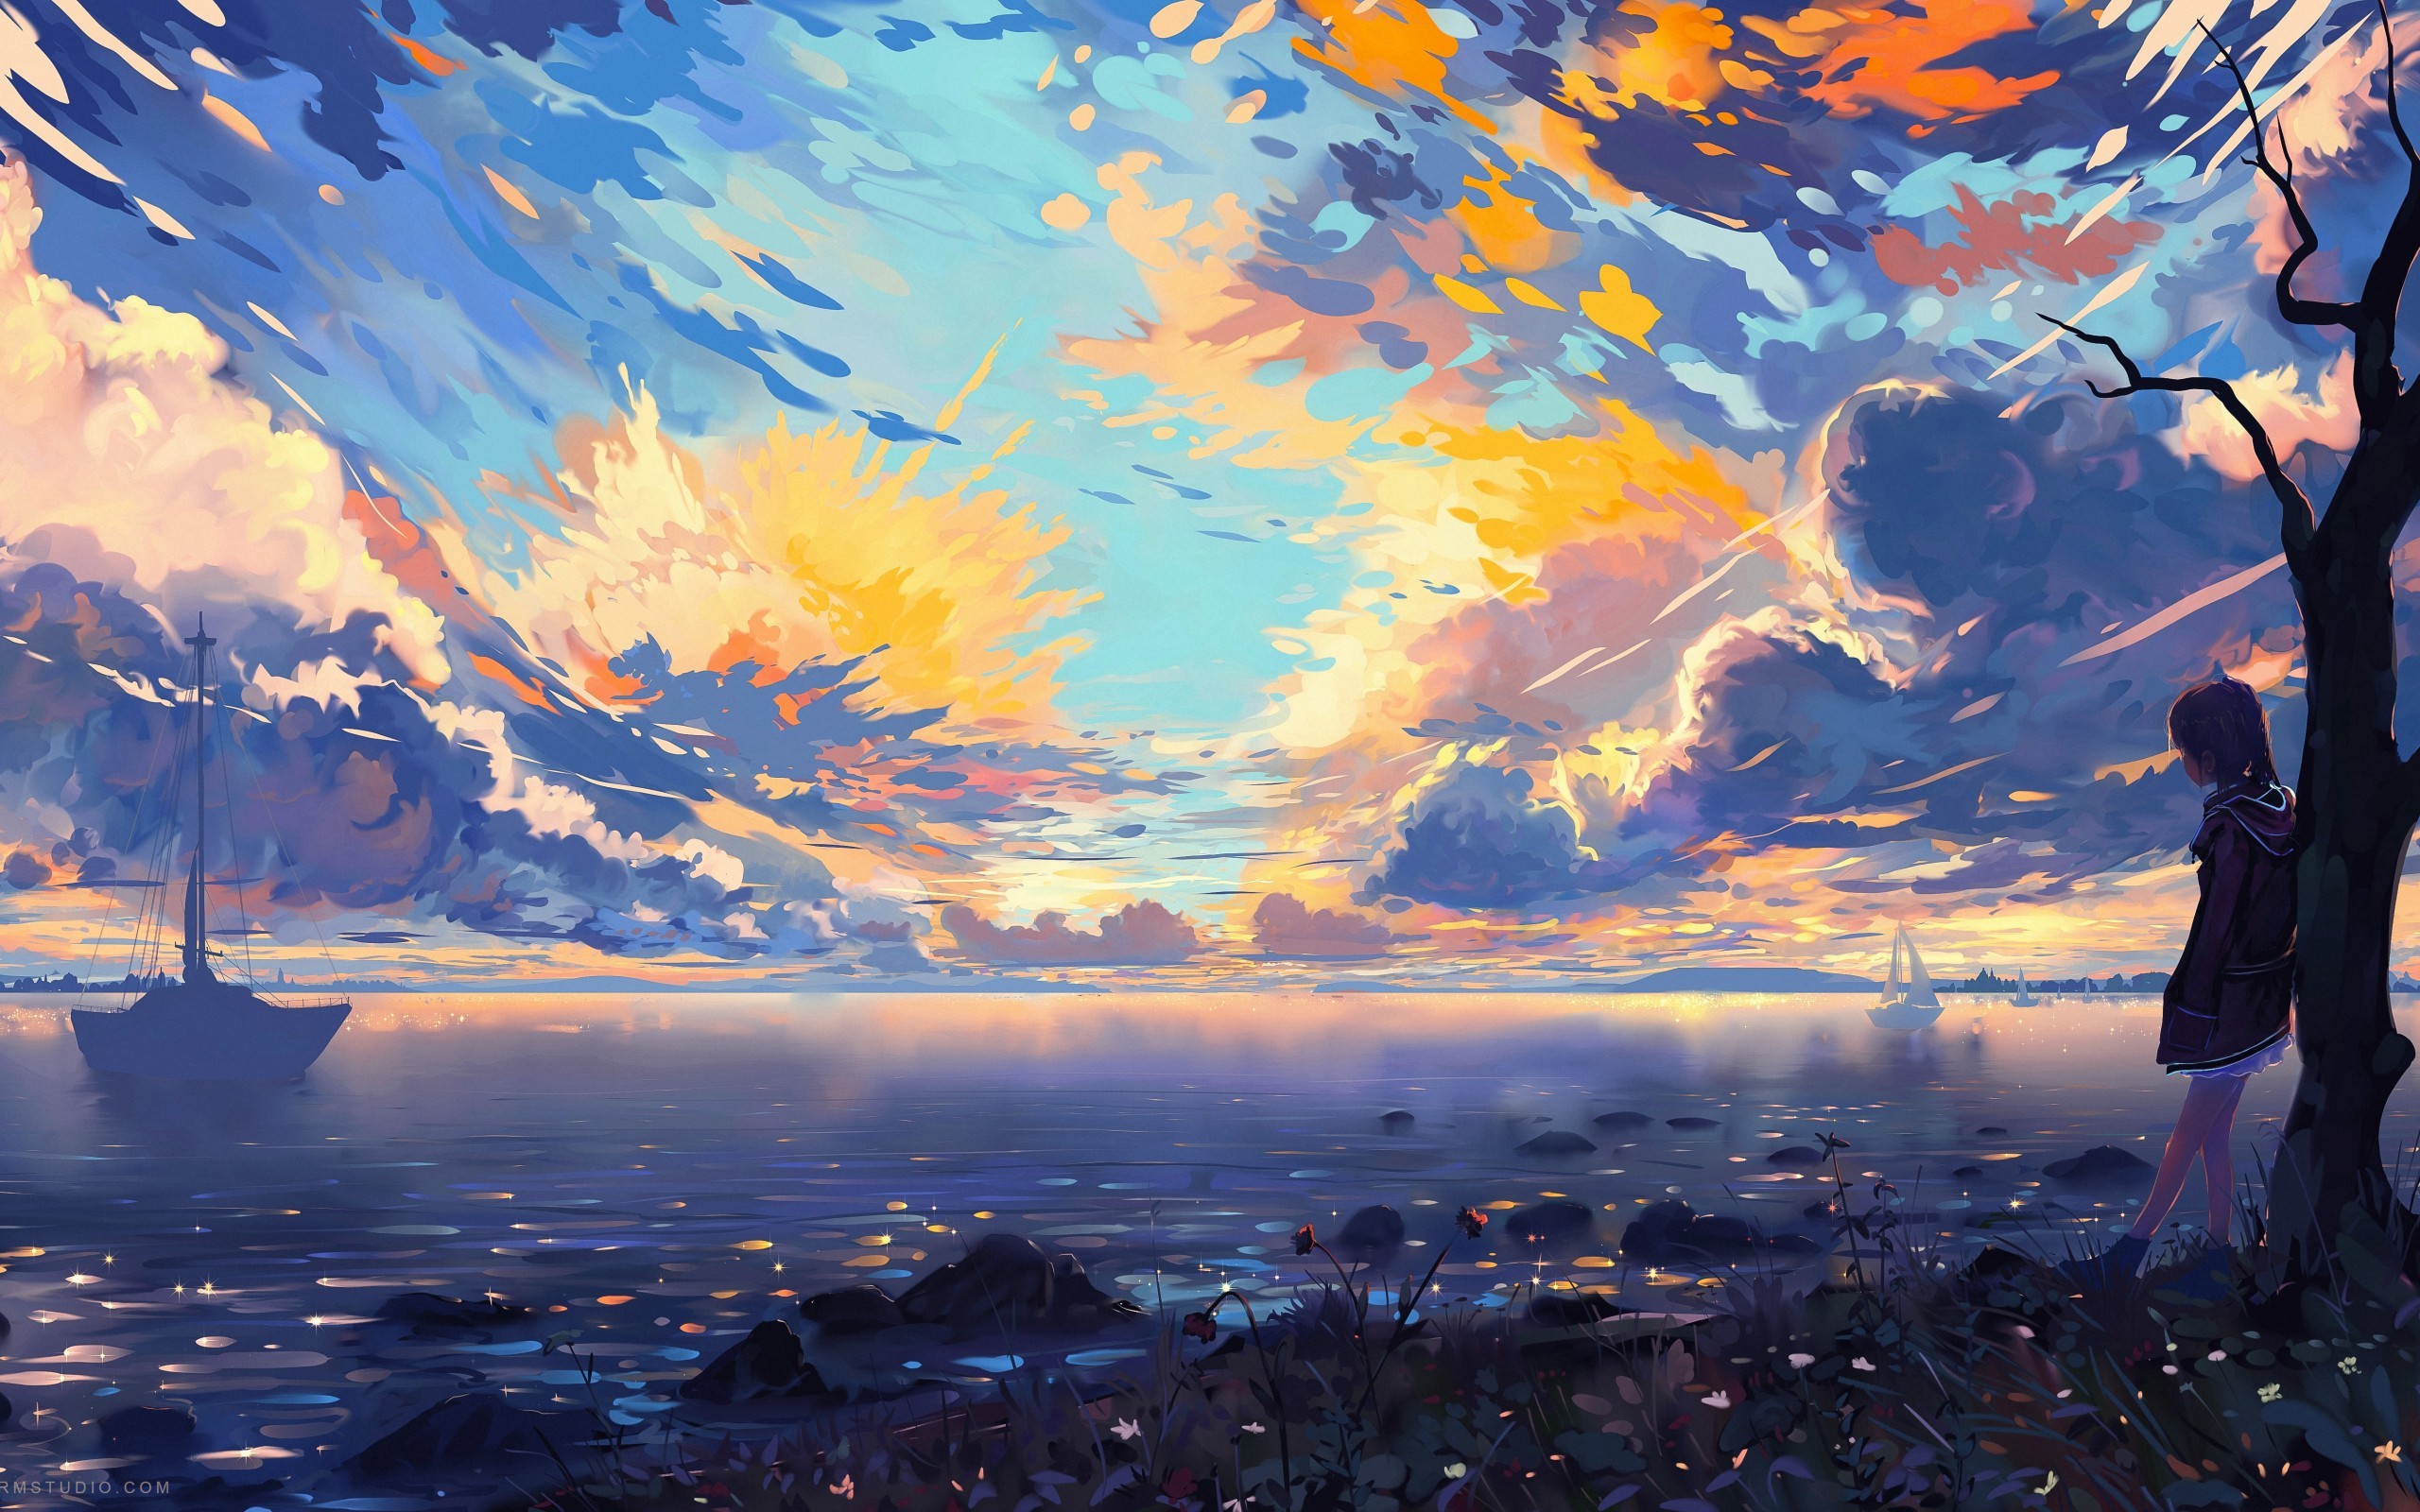 Free Download Download 2560x1600 Anime Landscape Sea Ships Colorful Clouds 2560x1600 For Your Desktop Mobile Tablet Explore 56 2560x1600 Wallpapers 2560x1600 Hd Wallpaper 2560x1600 Wallpapers High Resolution Wallpaper 2560x1600